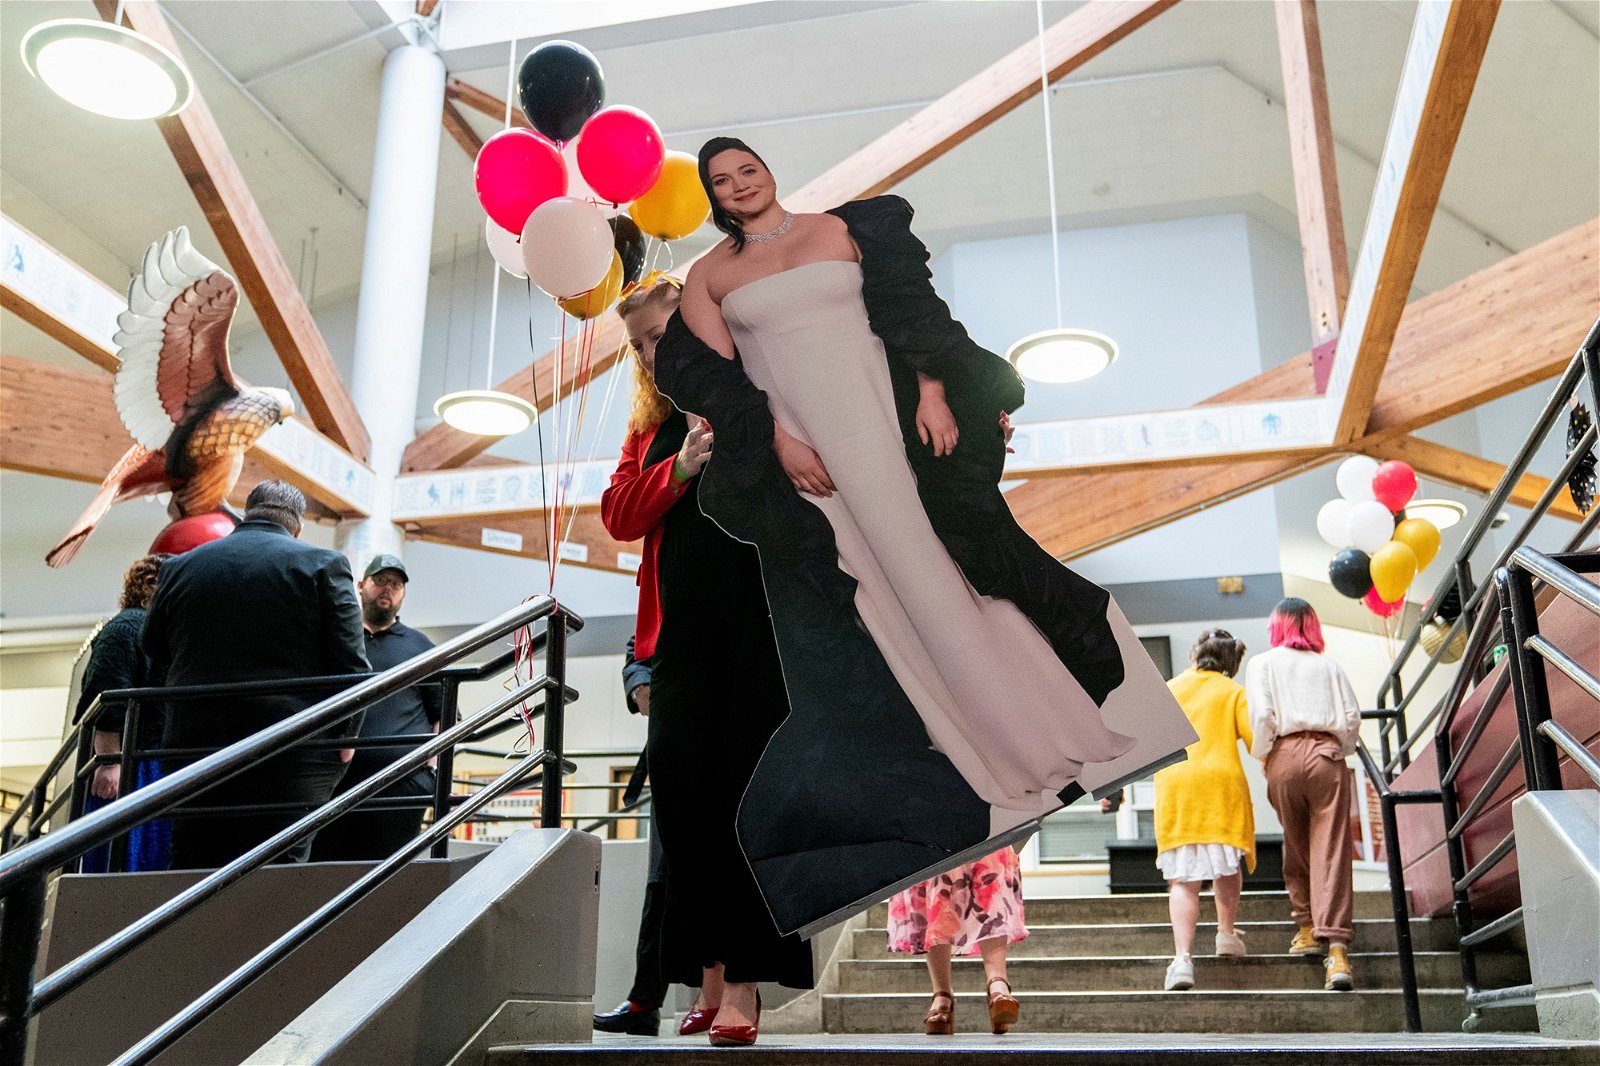 A woman walks a lily gladstone cardboard cut out down a stairs at a school